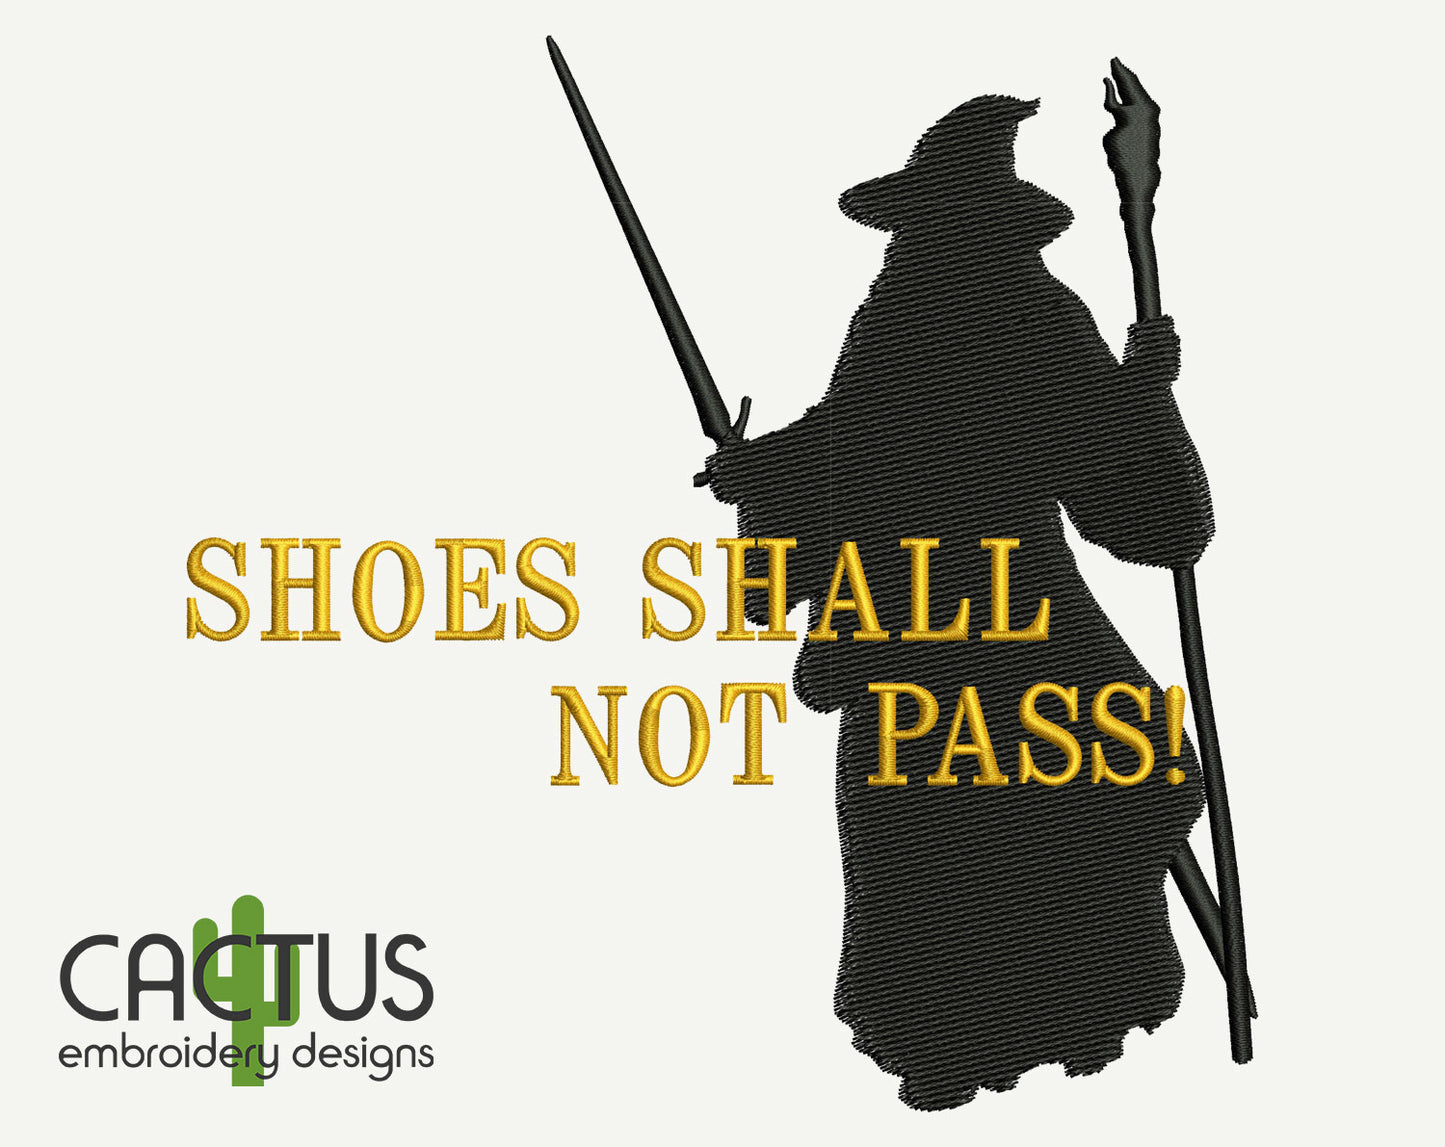 Shoes Shall Not Pass! Embroidery Design